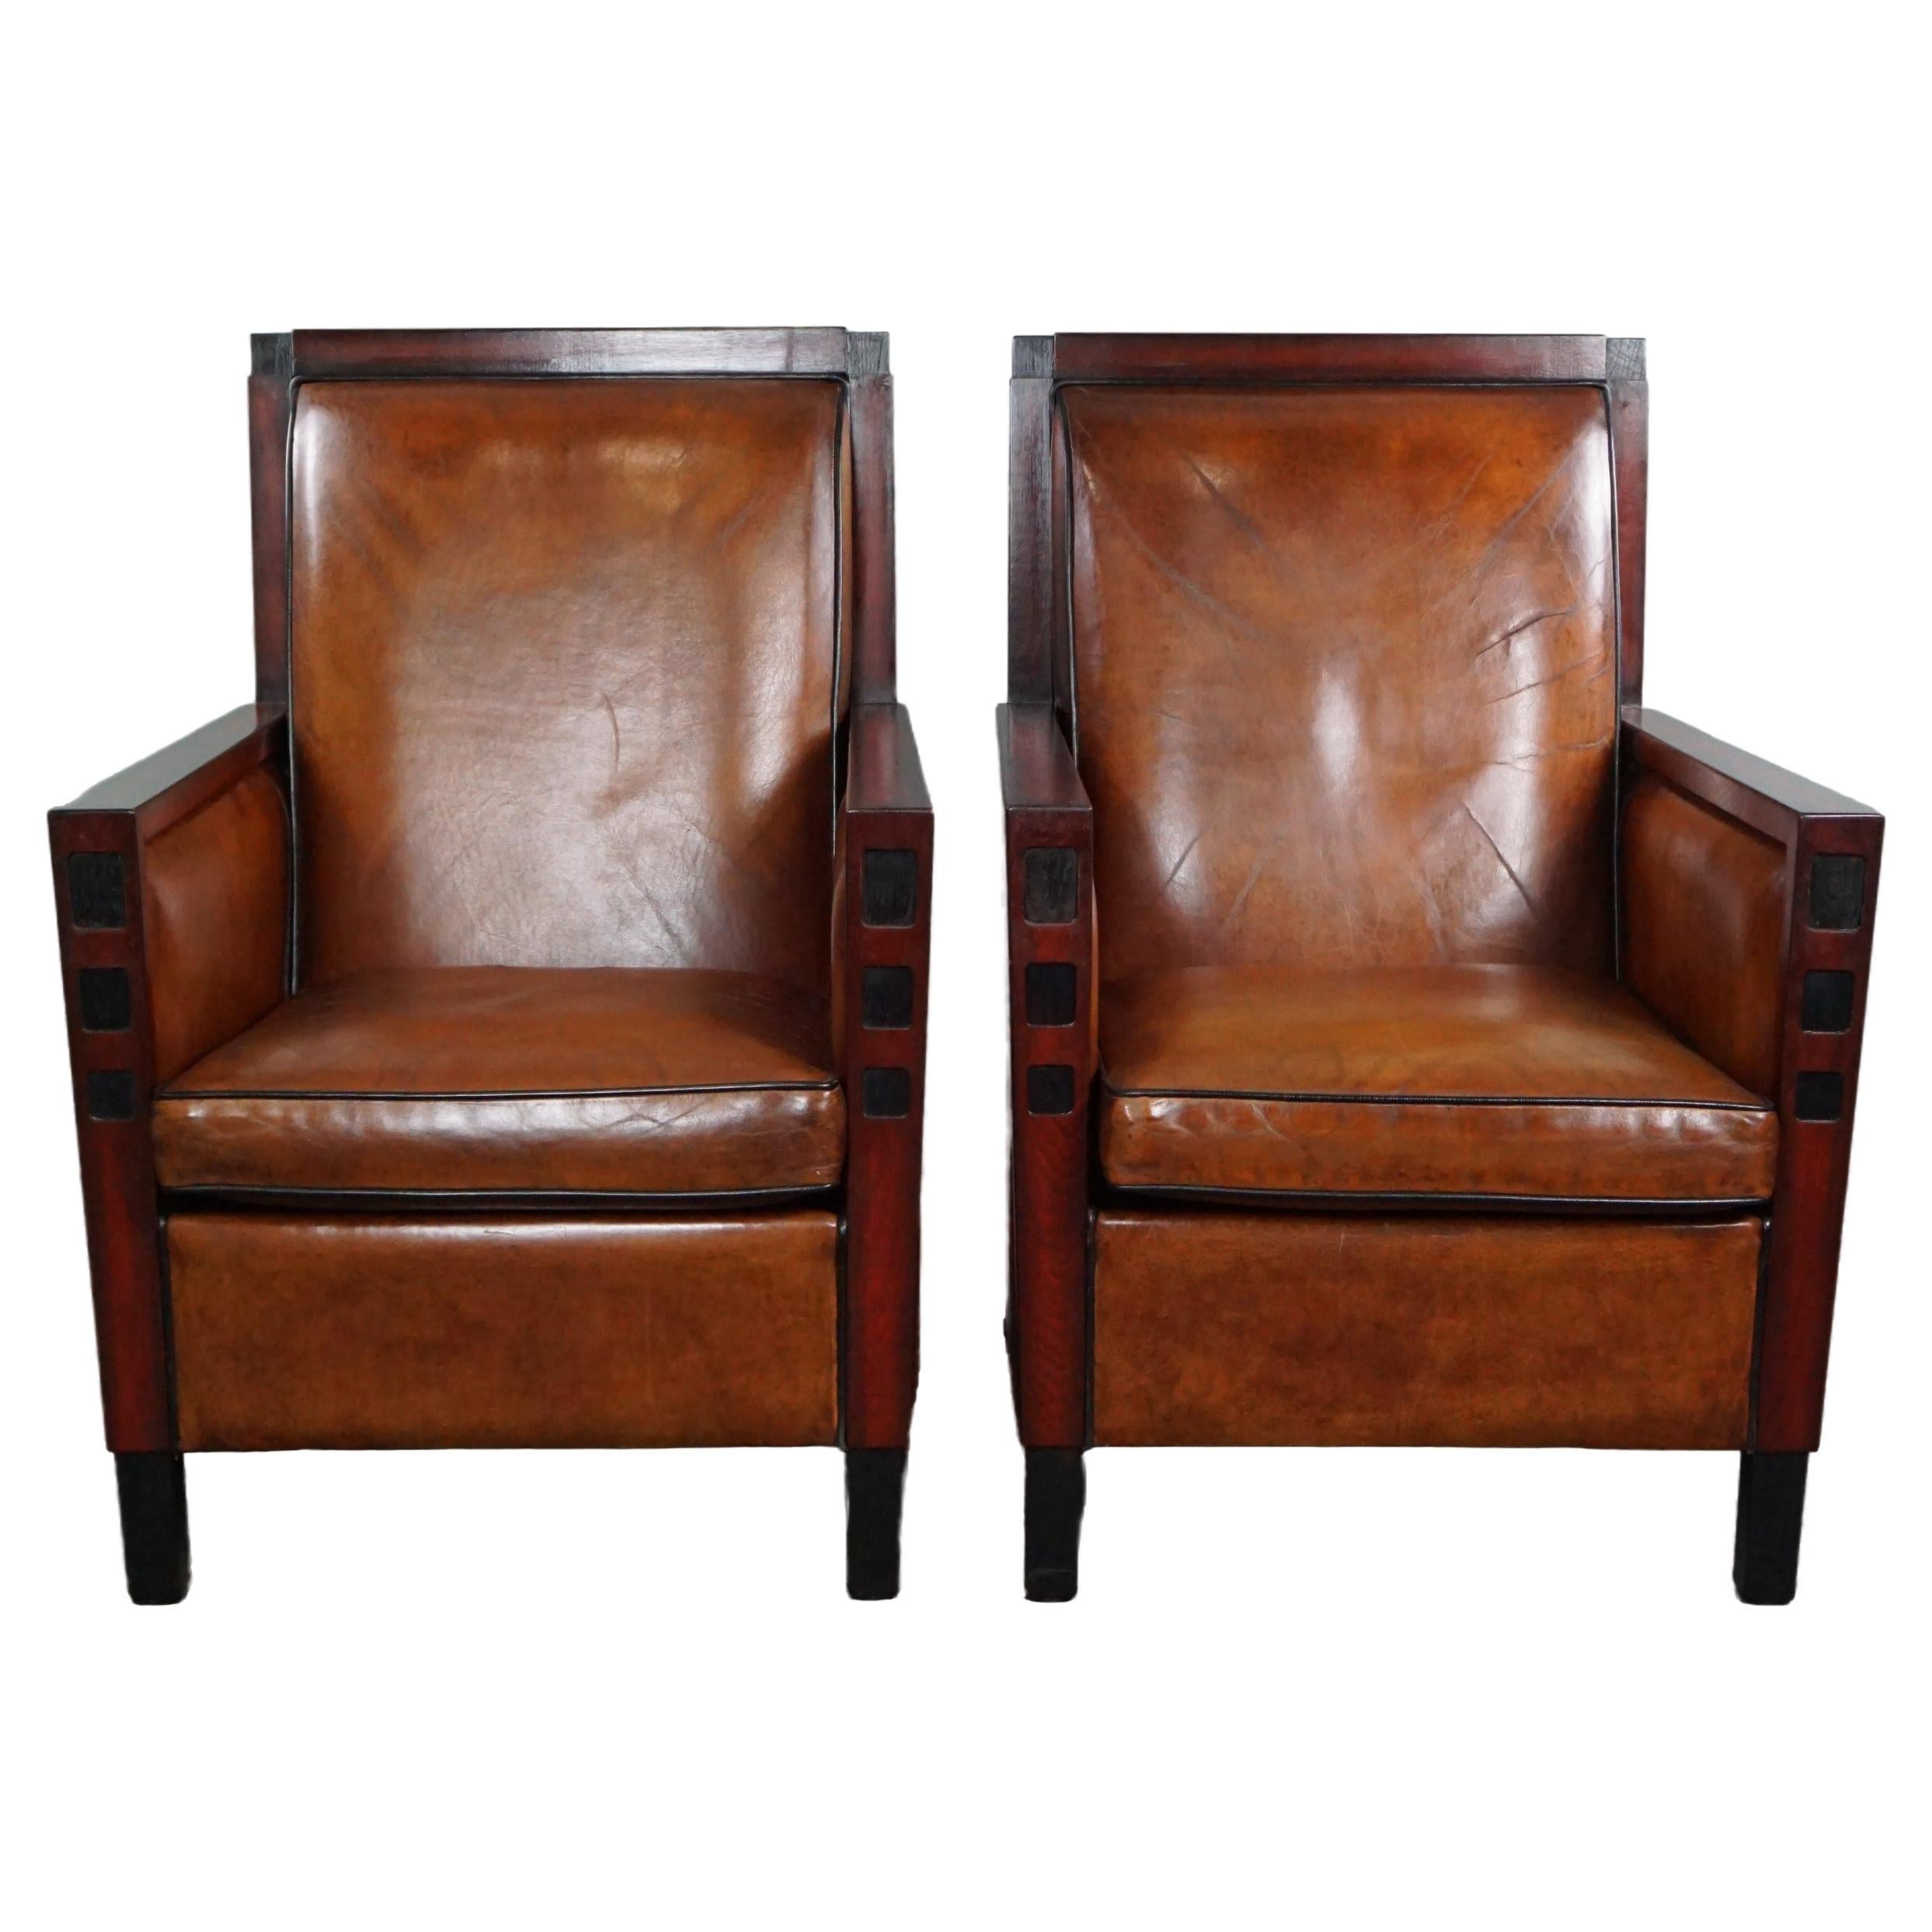 Art deco sheep leather armchairs/armchairs, set of two